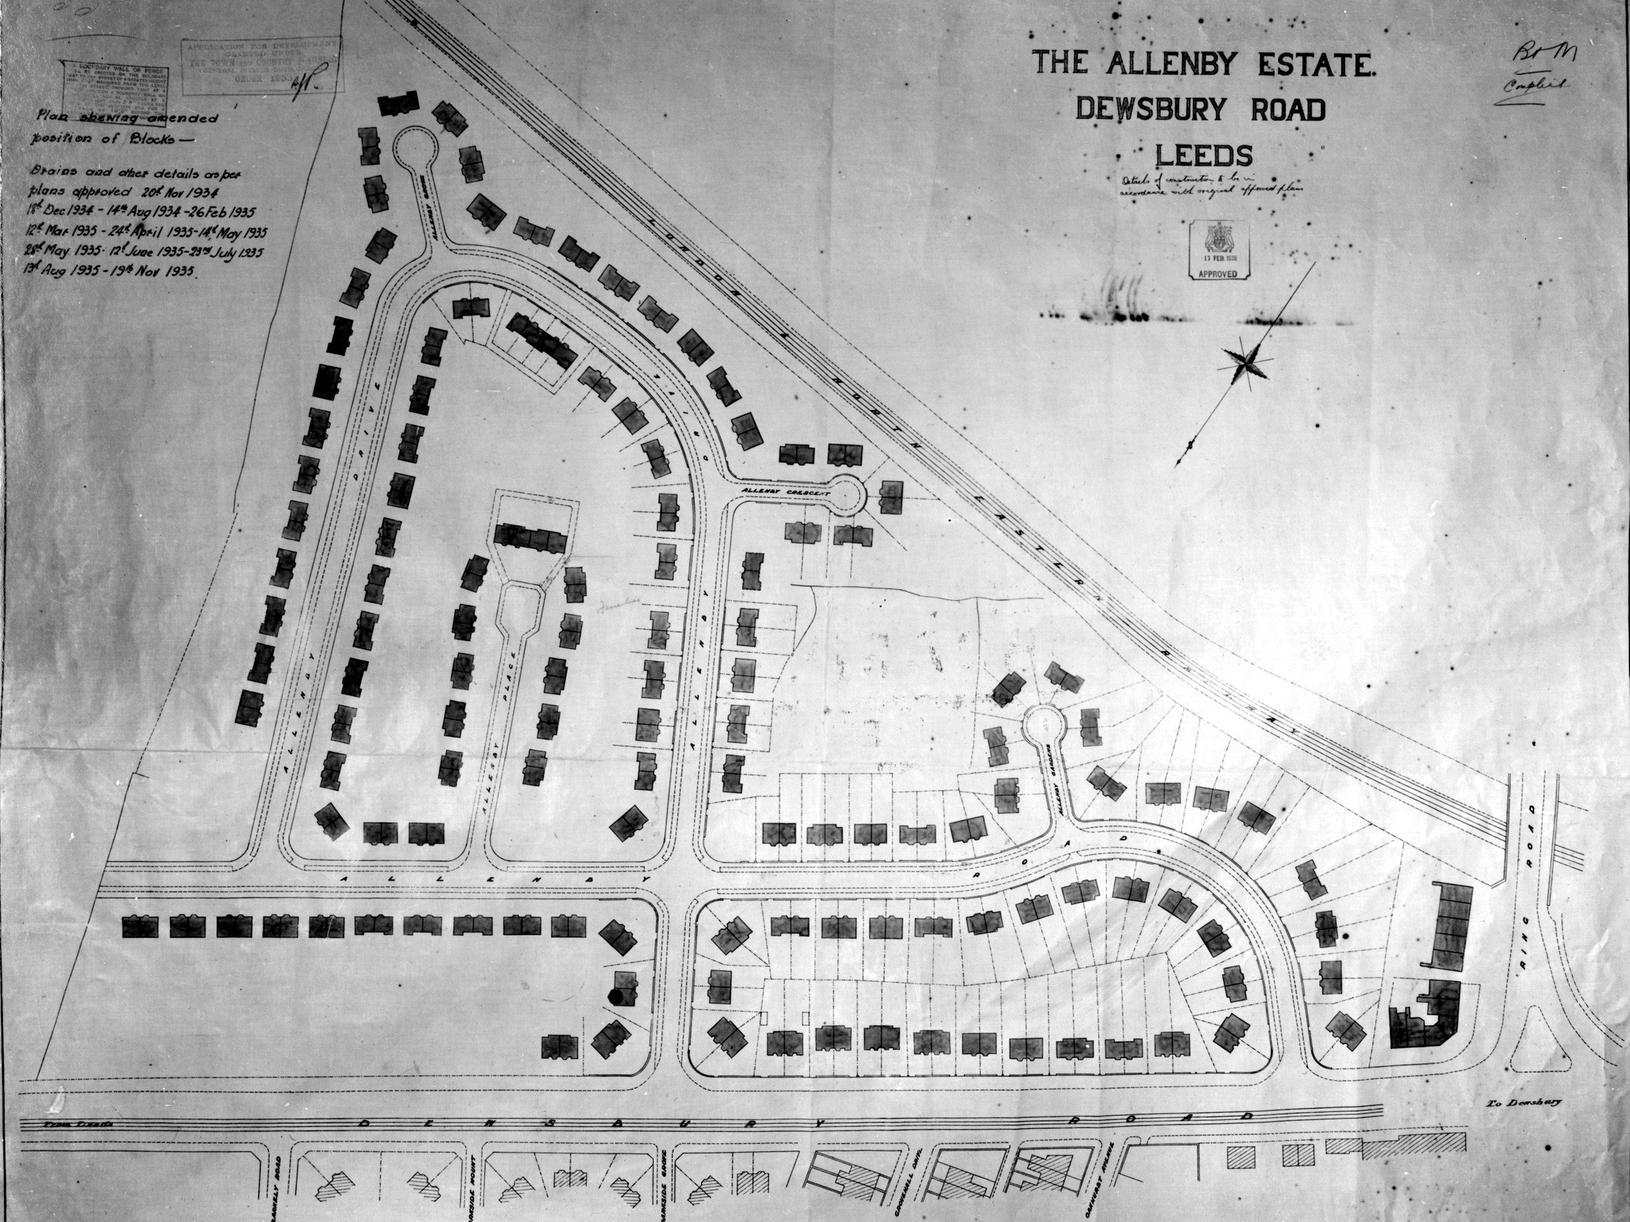 A council plan for the Allenby estate which was going to be built off Dewsbury Road in Beeston.